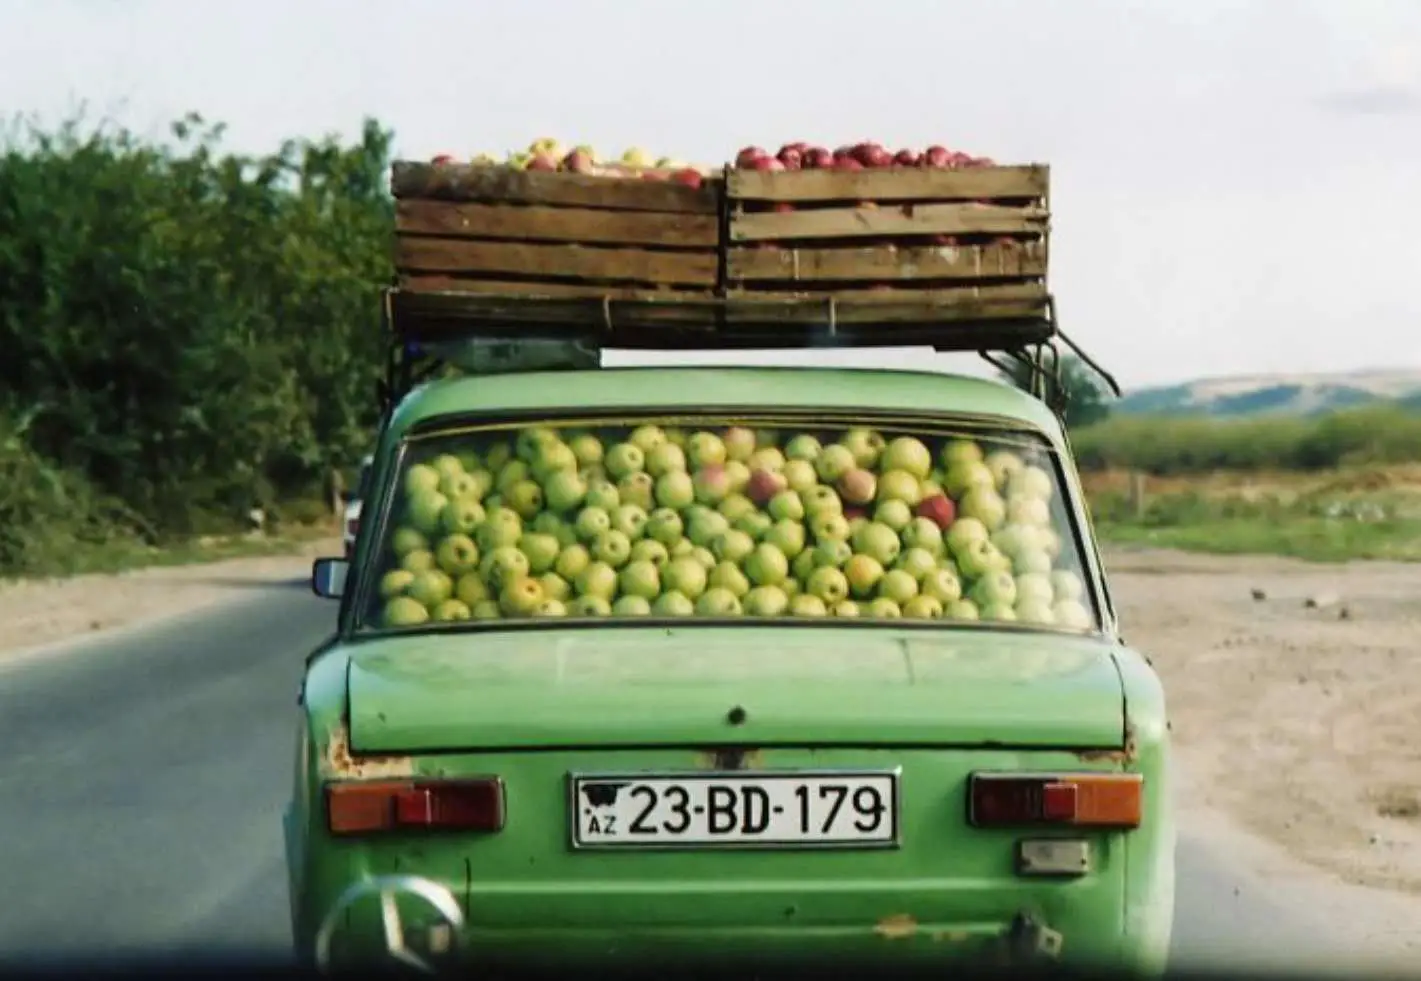 Car Overloaded With Apples